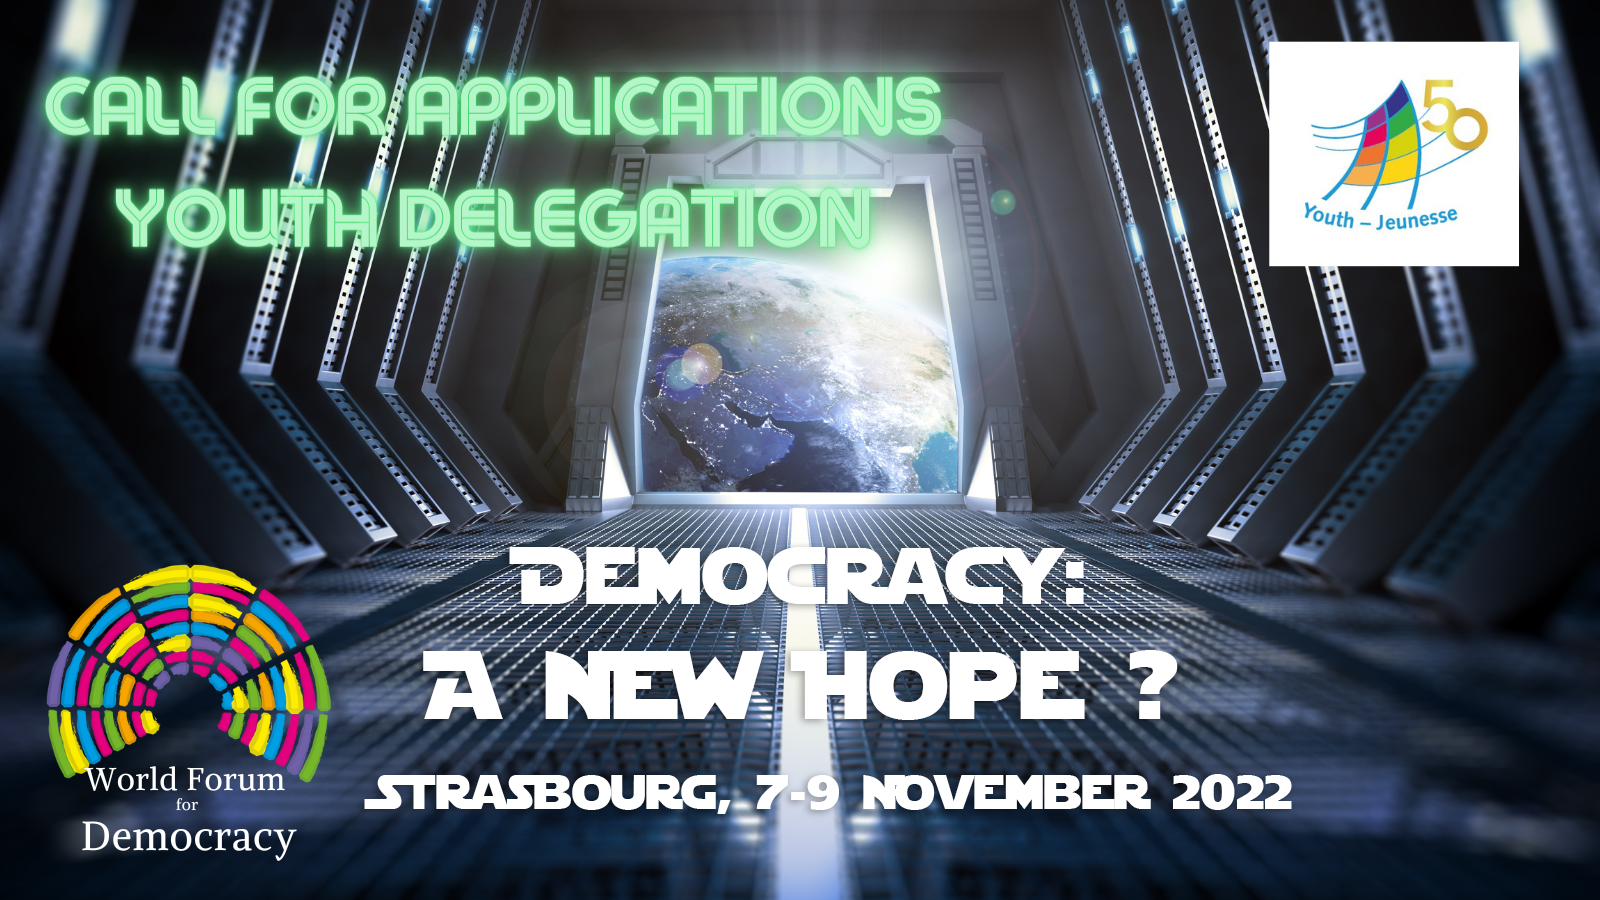 Call for applications World Forum for Democracy 2022 Youth